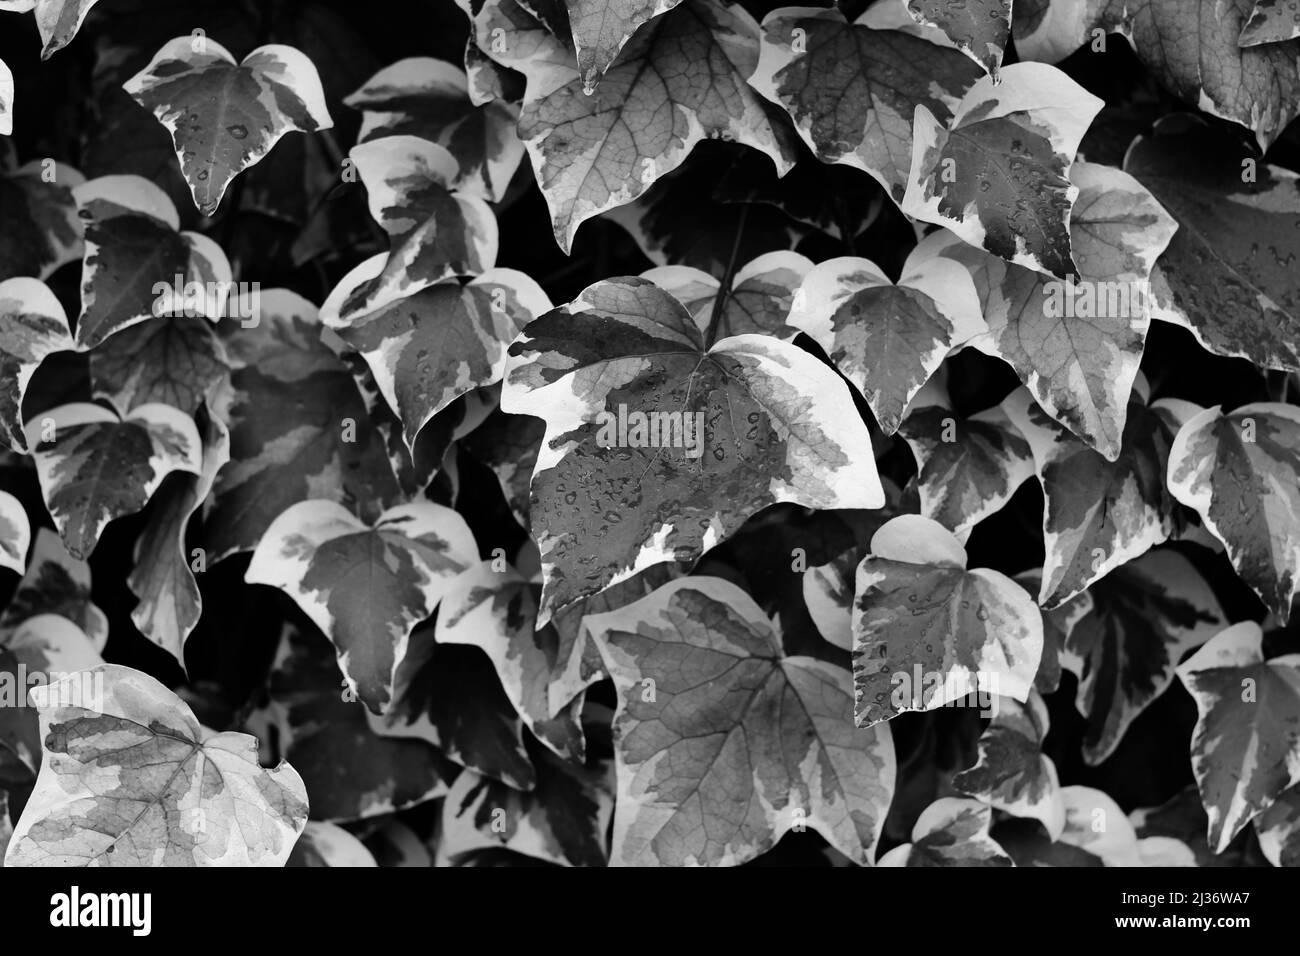 Beautiful leafy plants growing in the picturesque garden in black and white grayscale. Stock Photo